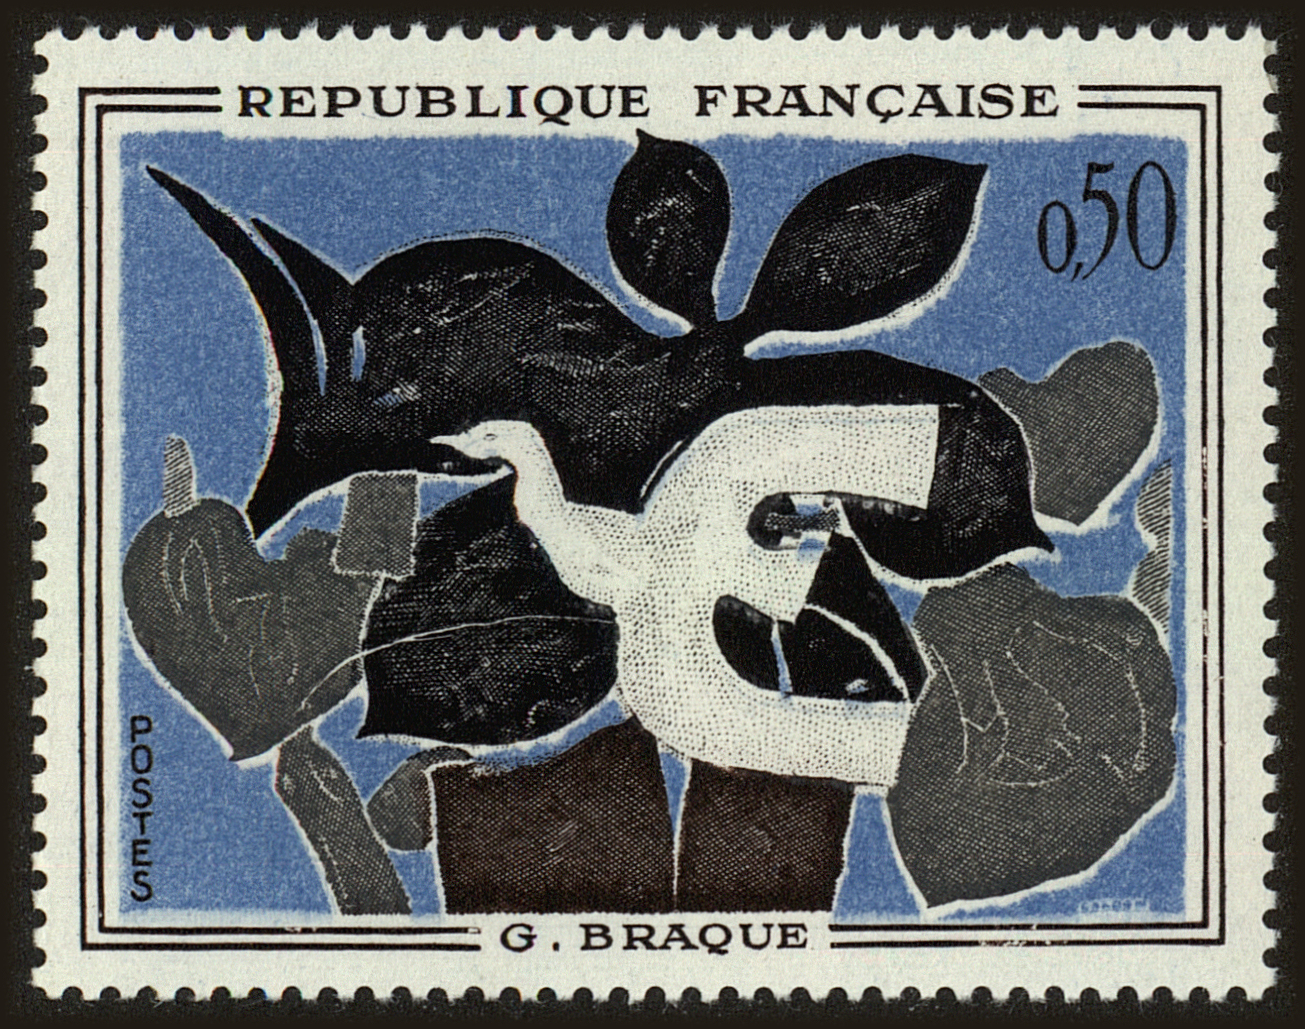 Front view of France 1014 collectors stamp